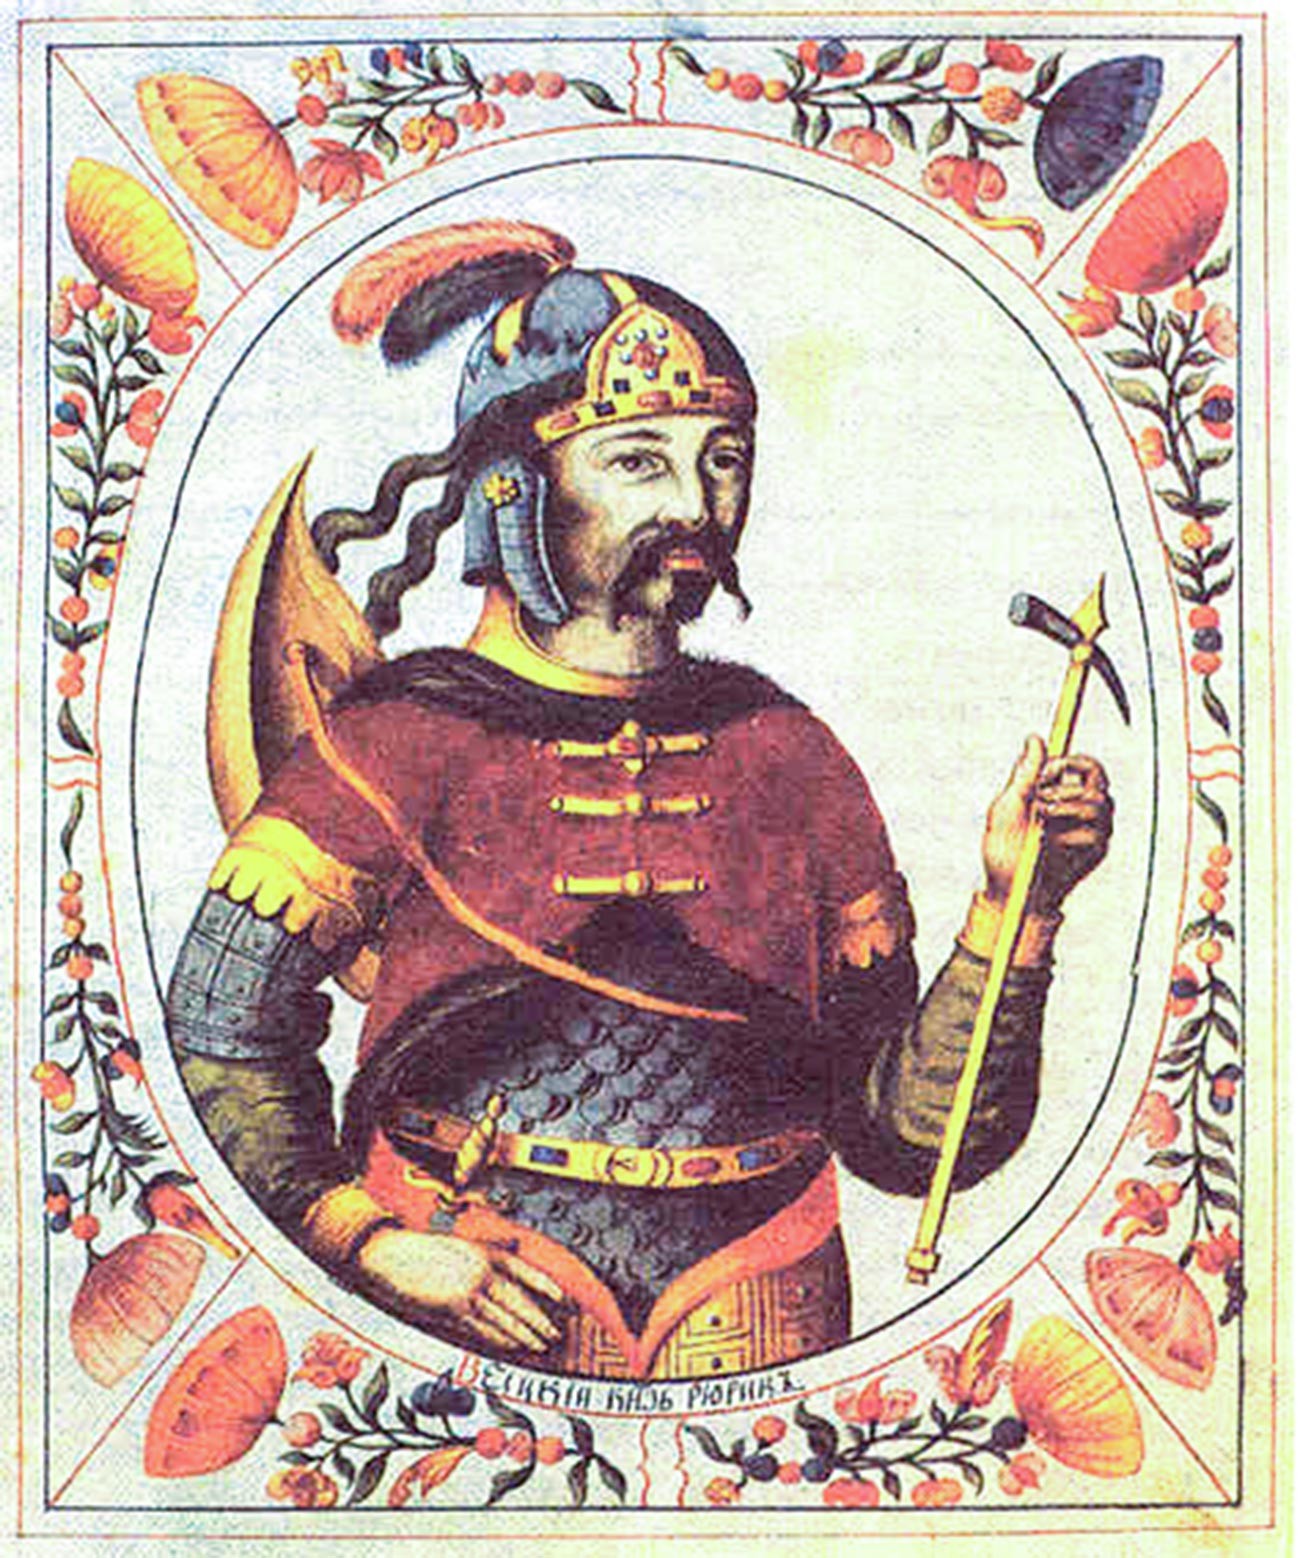 Rurik, a fictional portrait dating back to the 17th century.